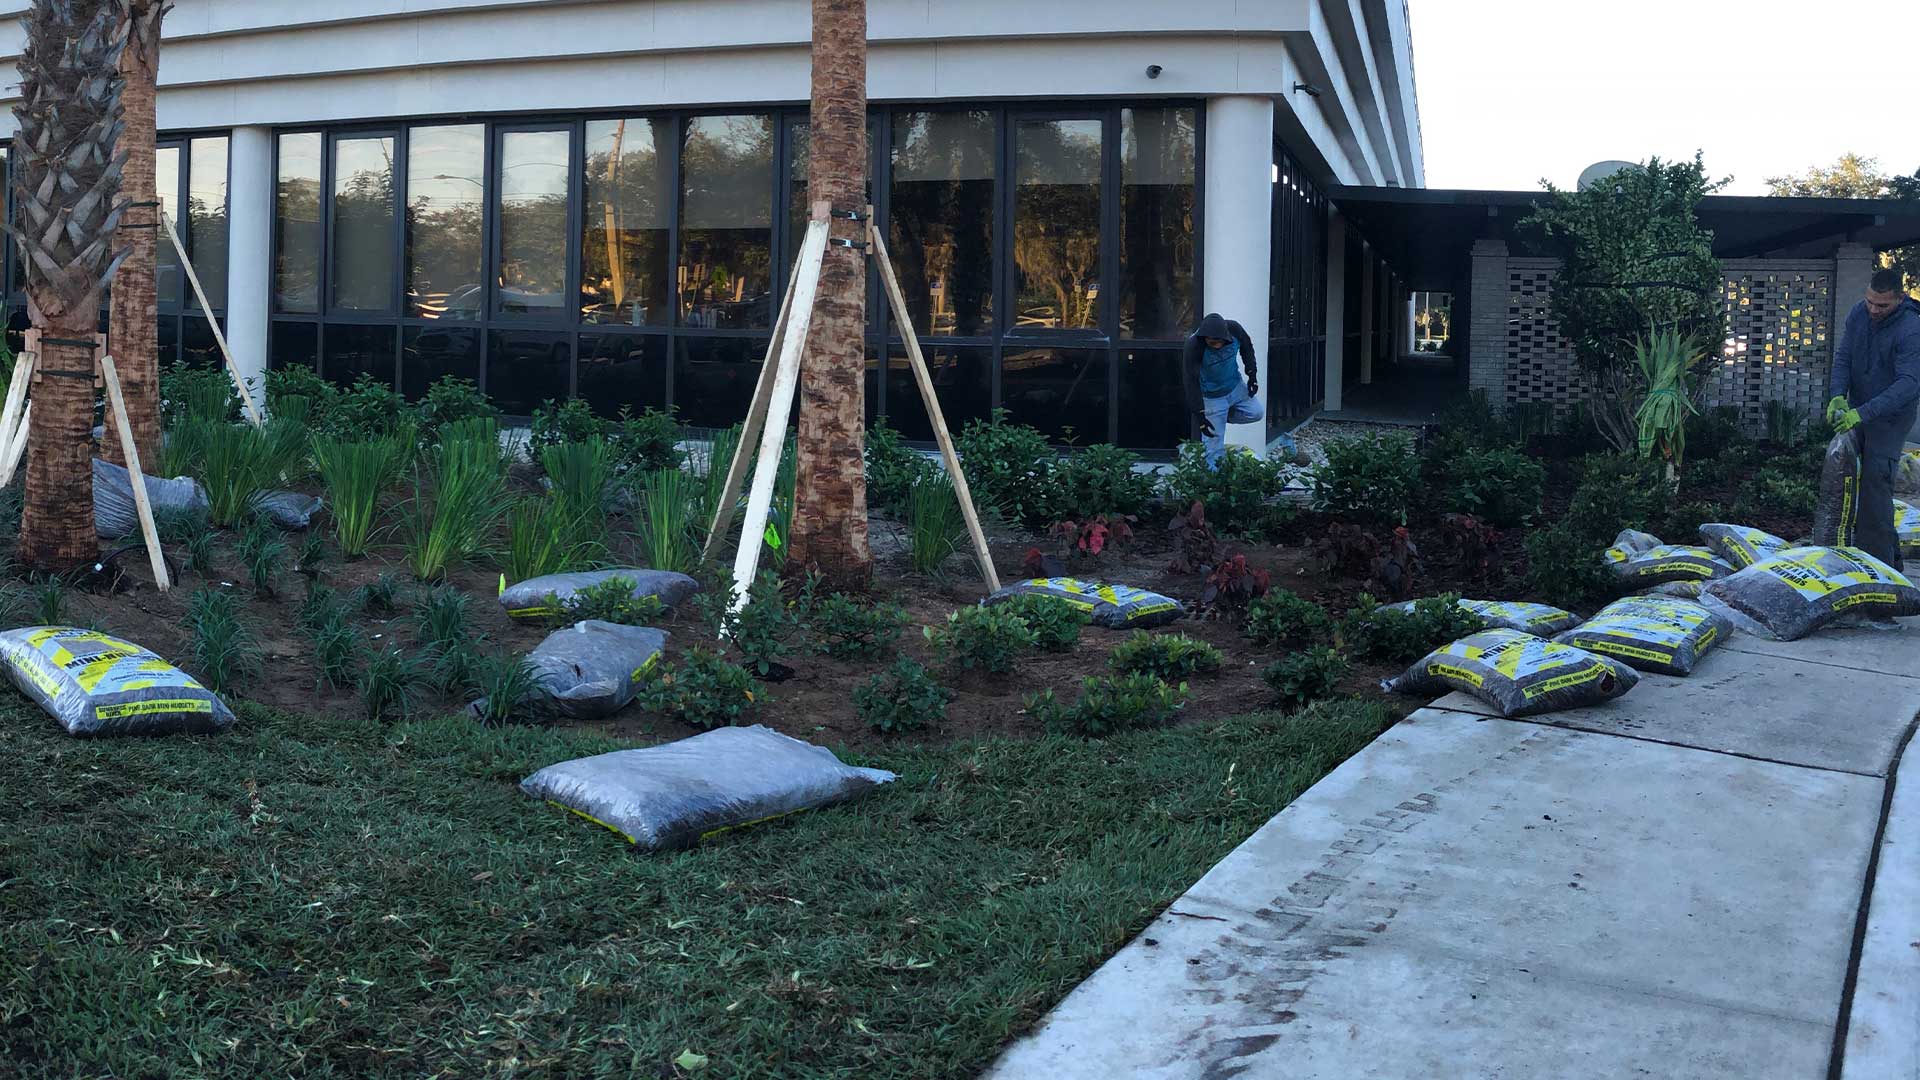 Landscaping project at a business in Lakeland, FL with new mulch being installed.